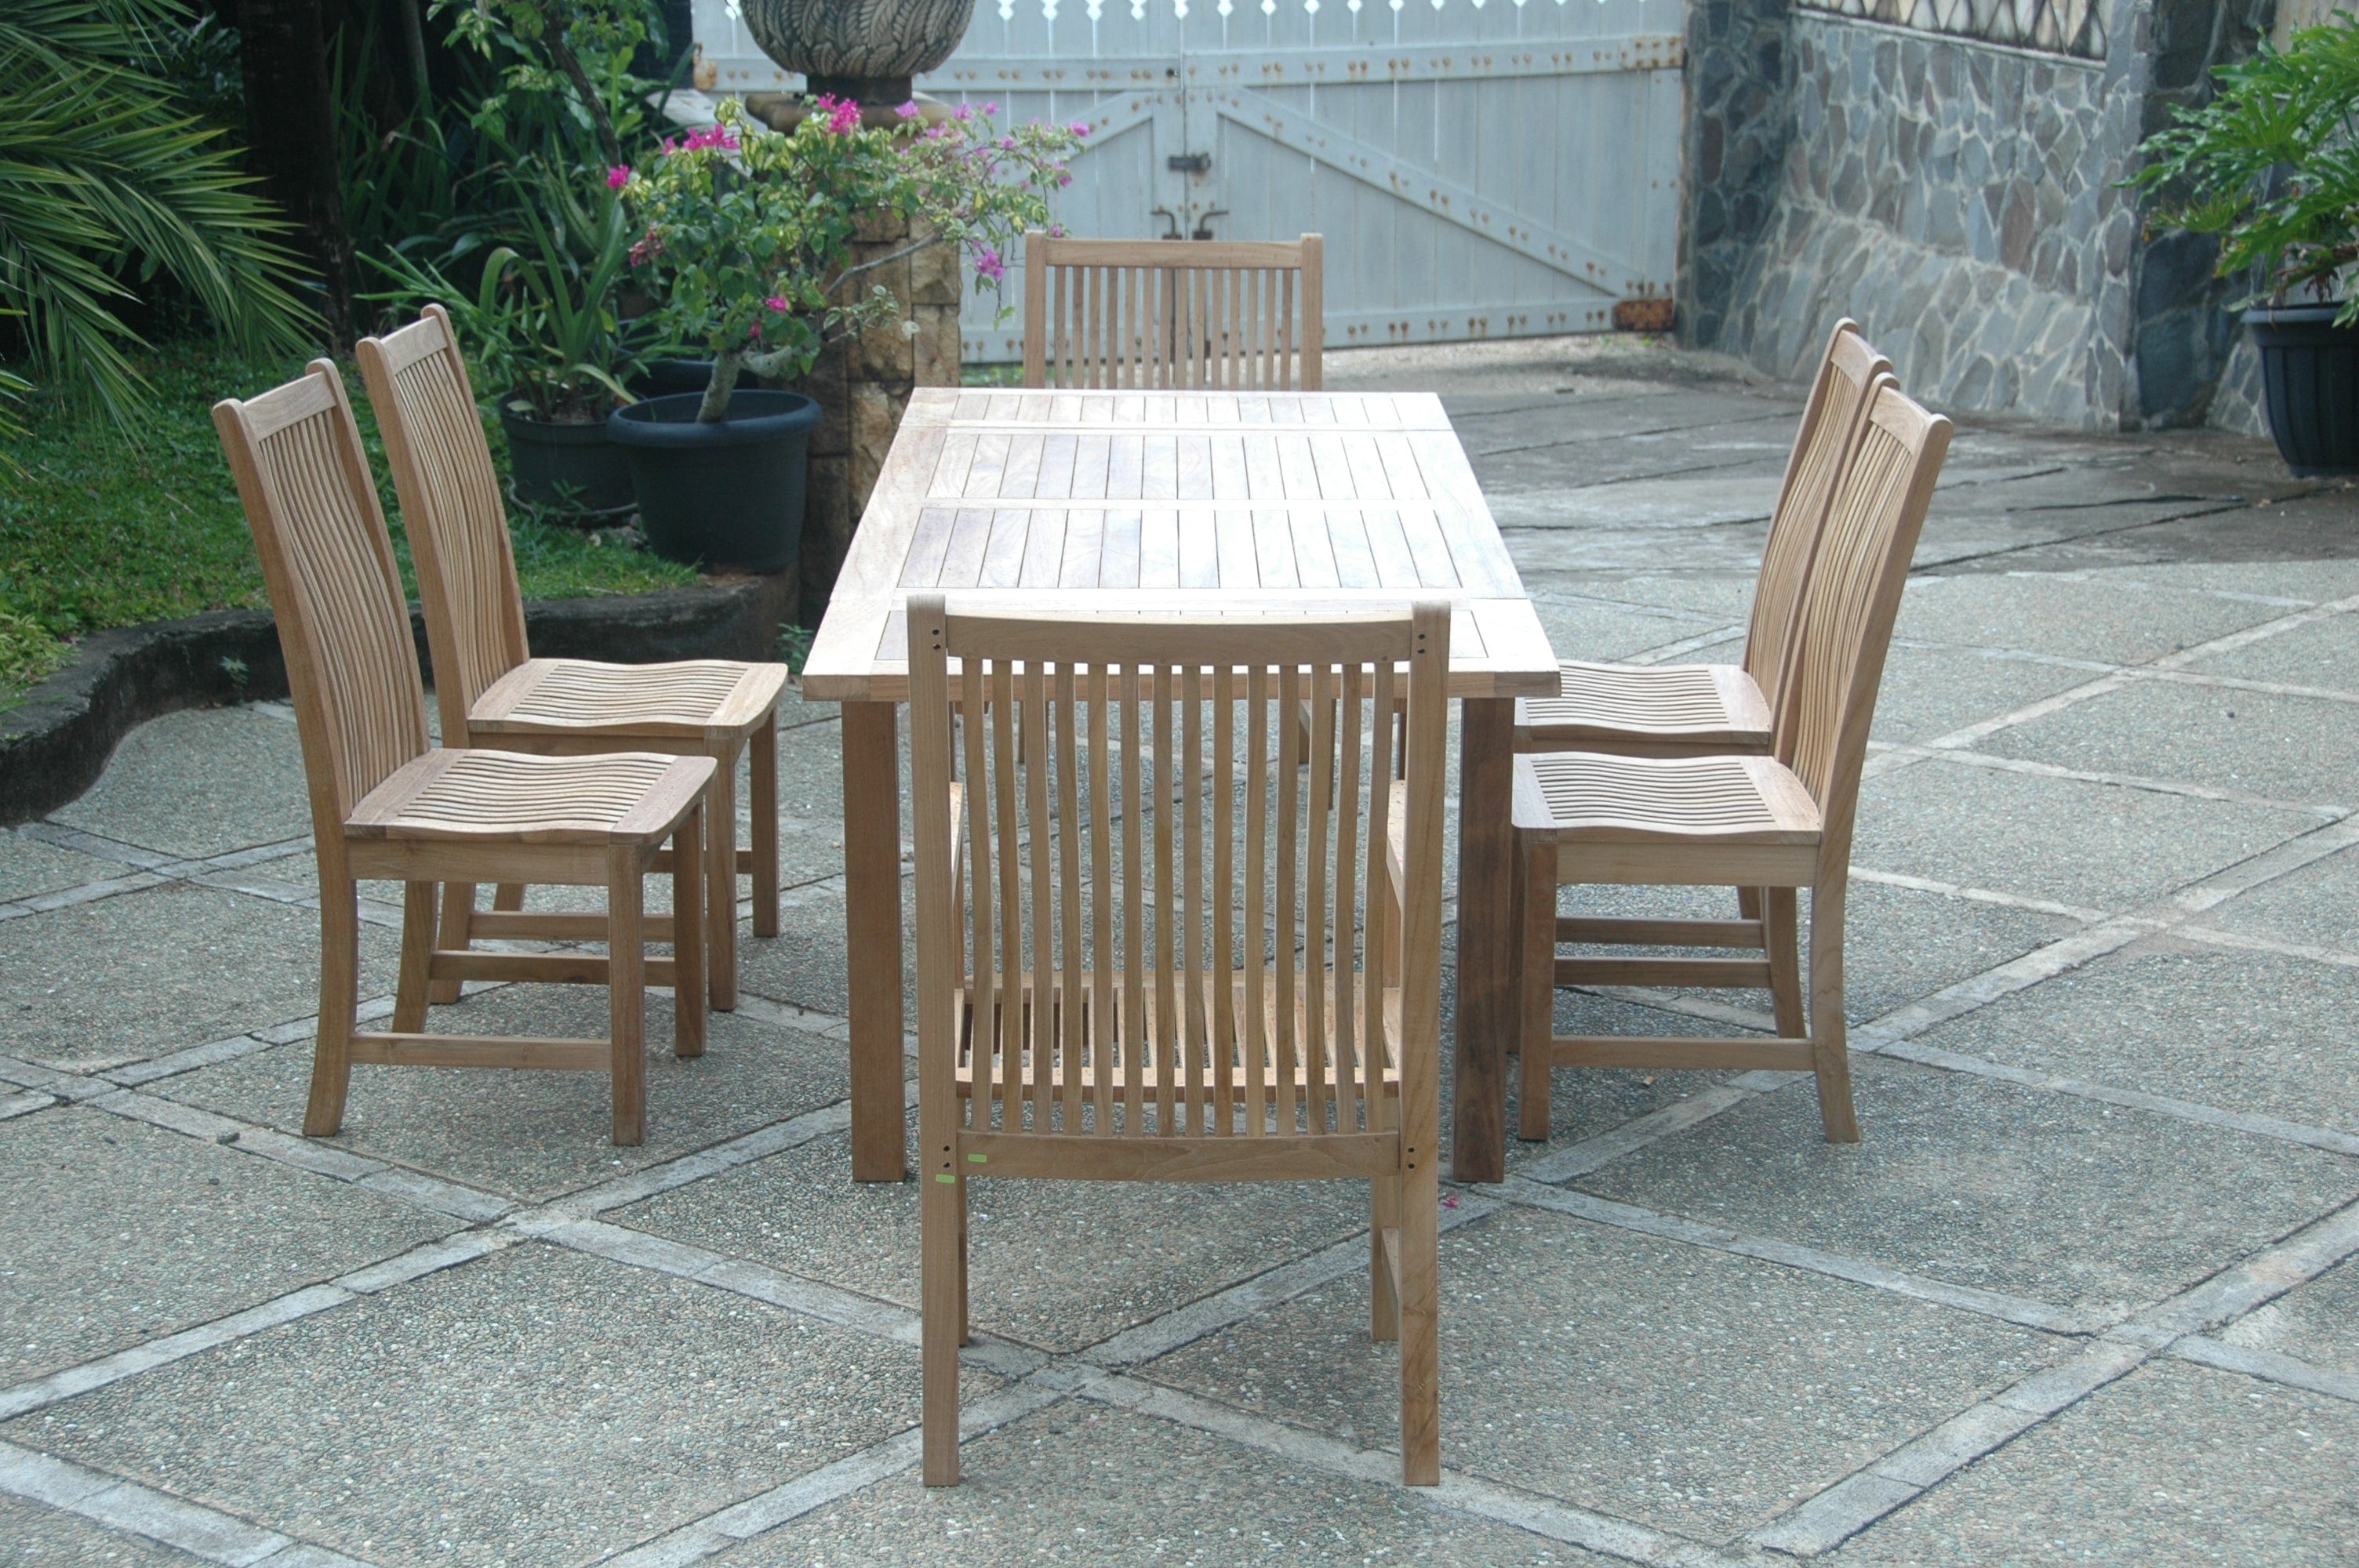 Anderson Teak Bahama Chicago 7-Pieces Dining Set Chair B Set-14